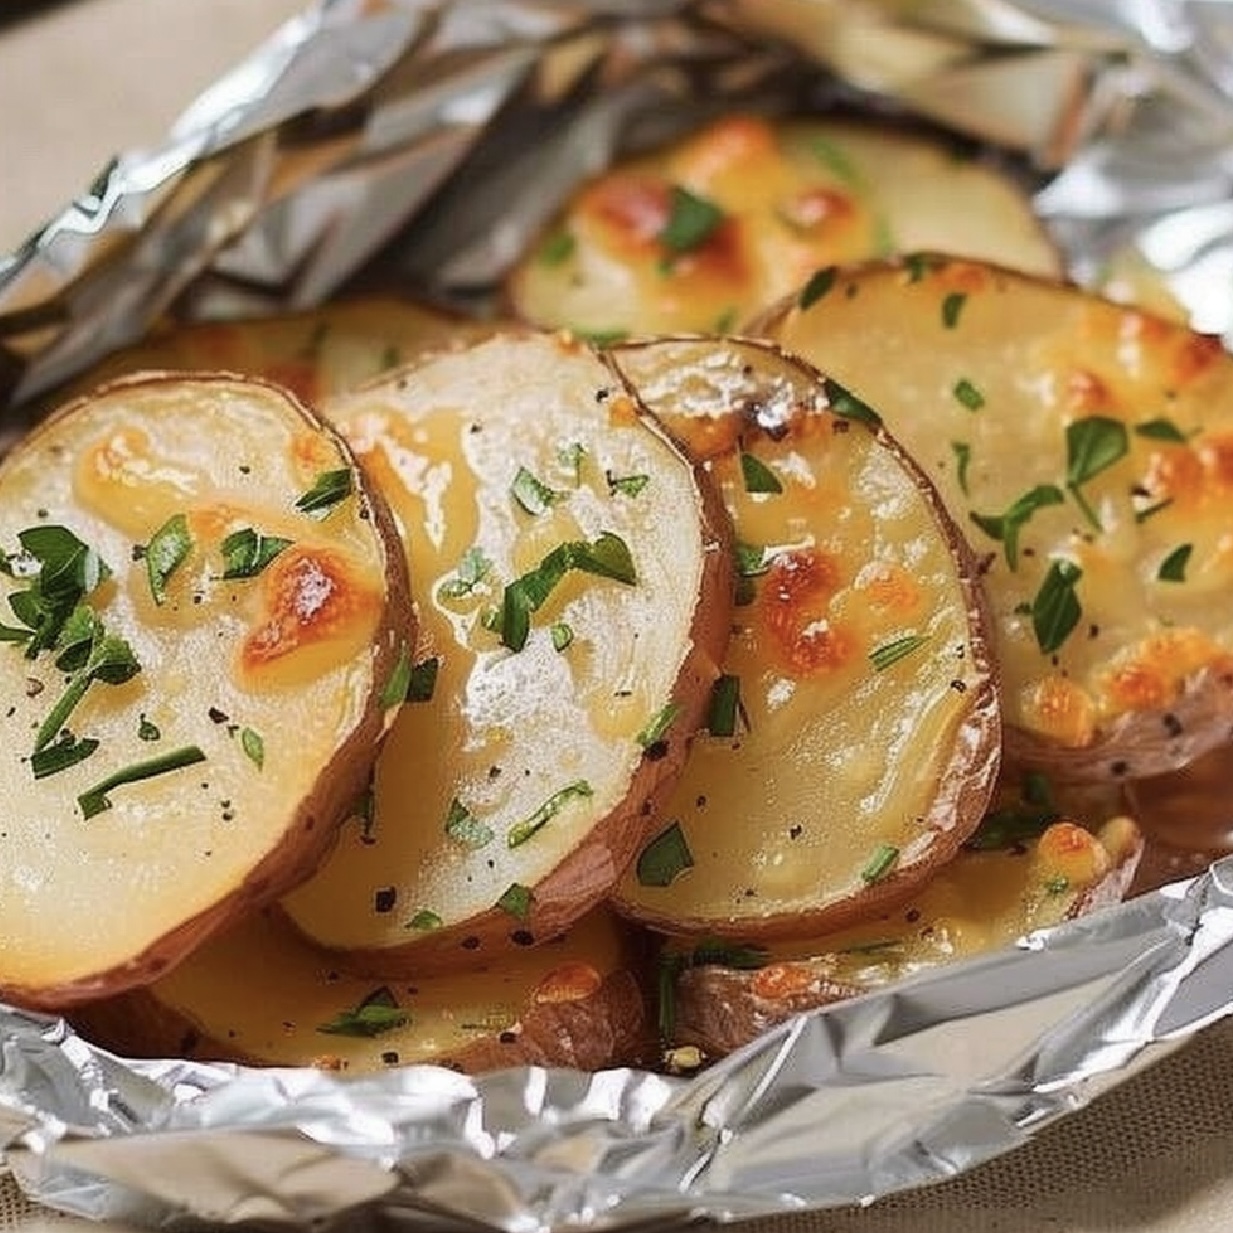 Discover the secret to making easy, flavorful potato foil packets that are perfect for any occasion. A quick, no-fuss recipe that promises delicious results every time.